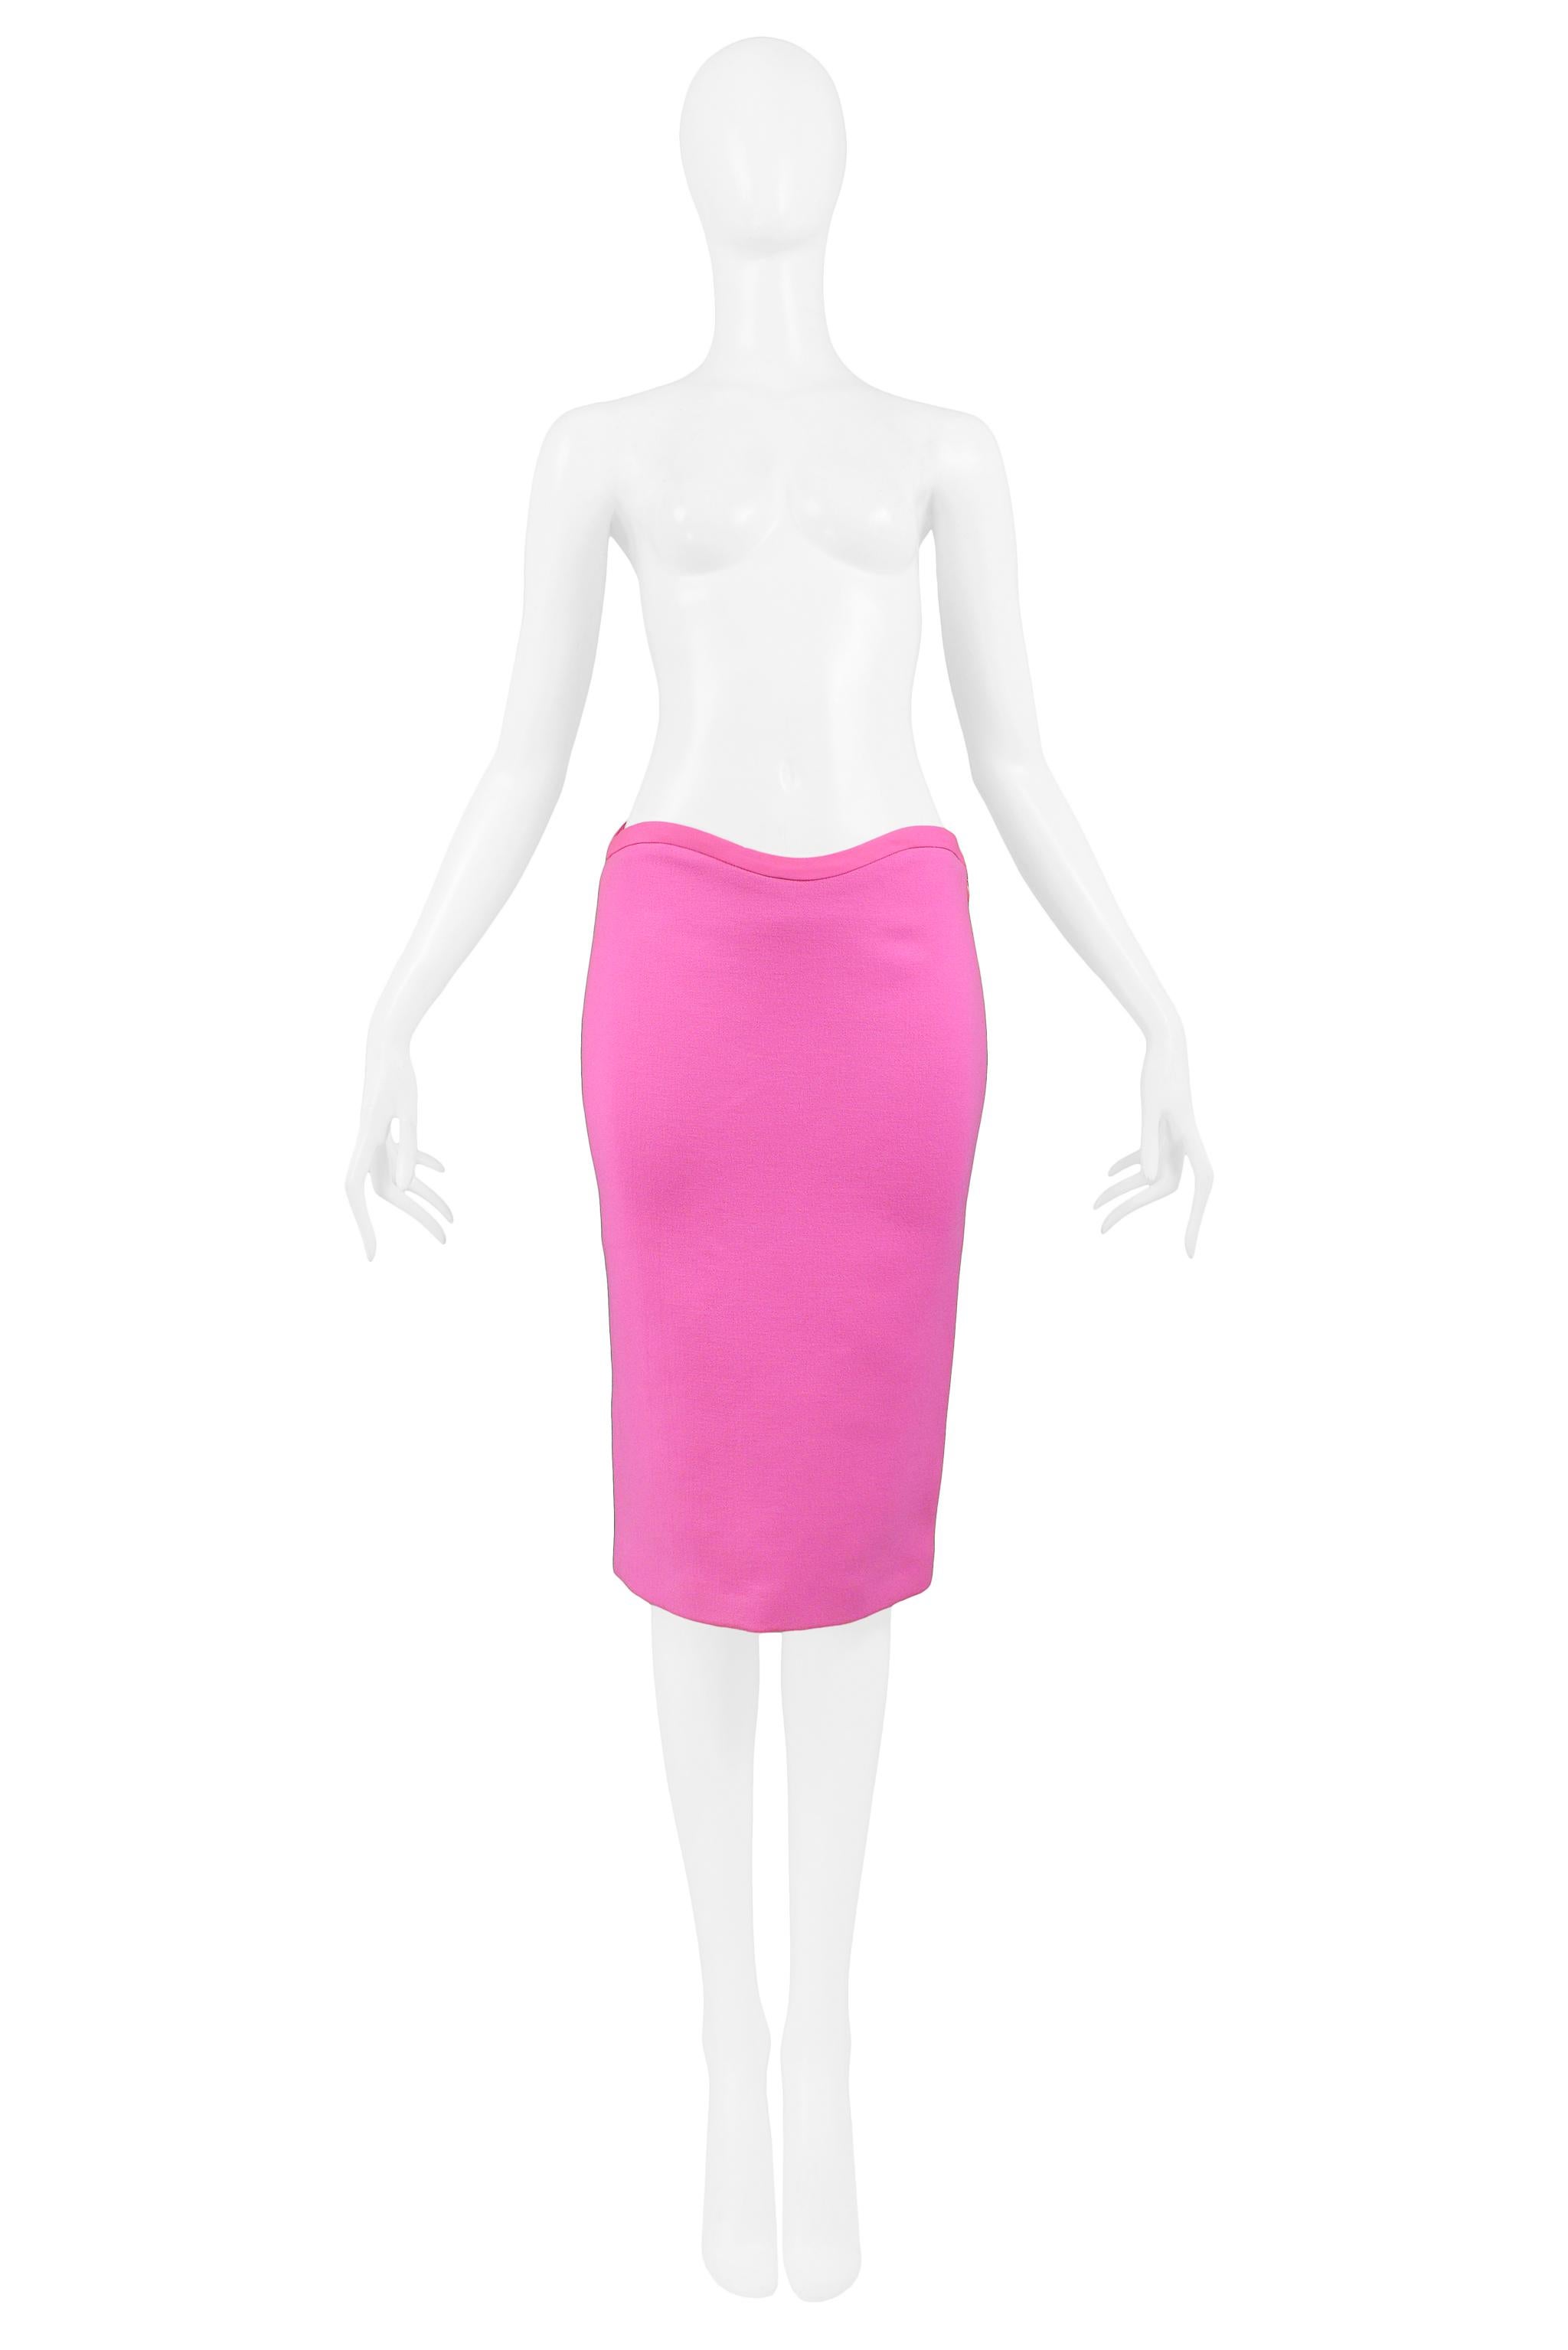 Vintage Versace bright pink pencil skirt featuring a curved waist detail and double slit at center back. Skirt has original tags. Collection 2002. 

Excellent Vintage Condition.

Size: IT 38

Measurements: Waist 25-26